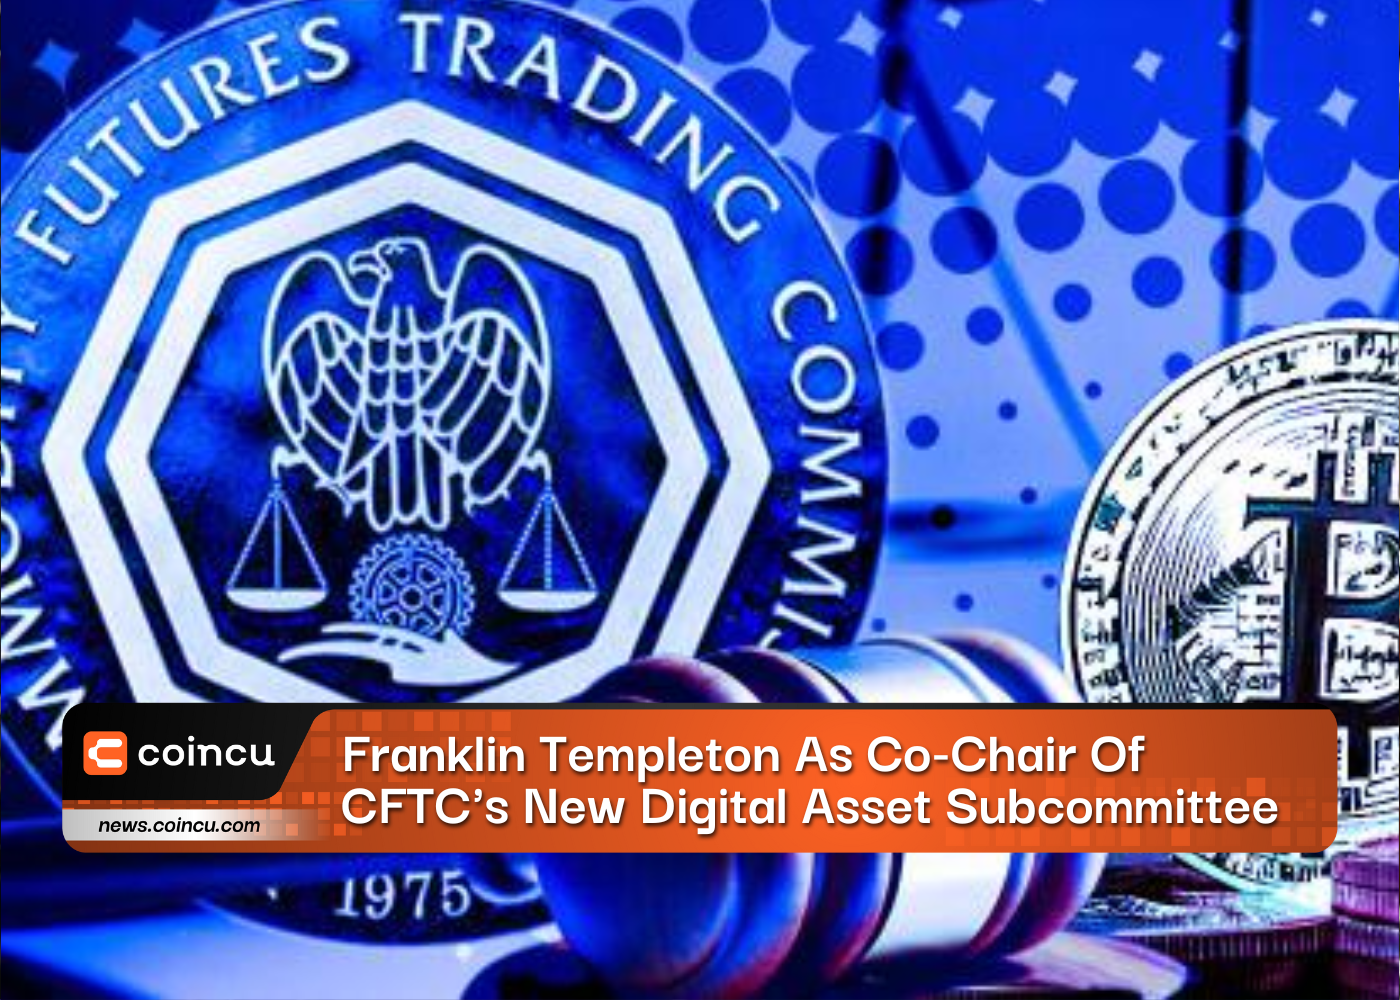 Franklin Templeton As Co-Chair Of CFTC's New Digital Asset Subcommittee